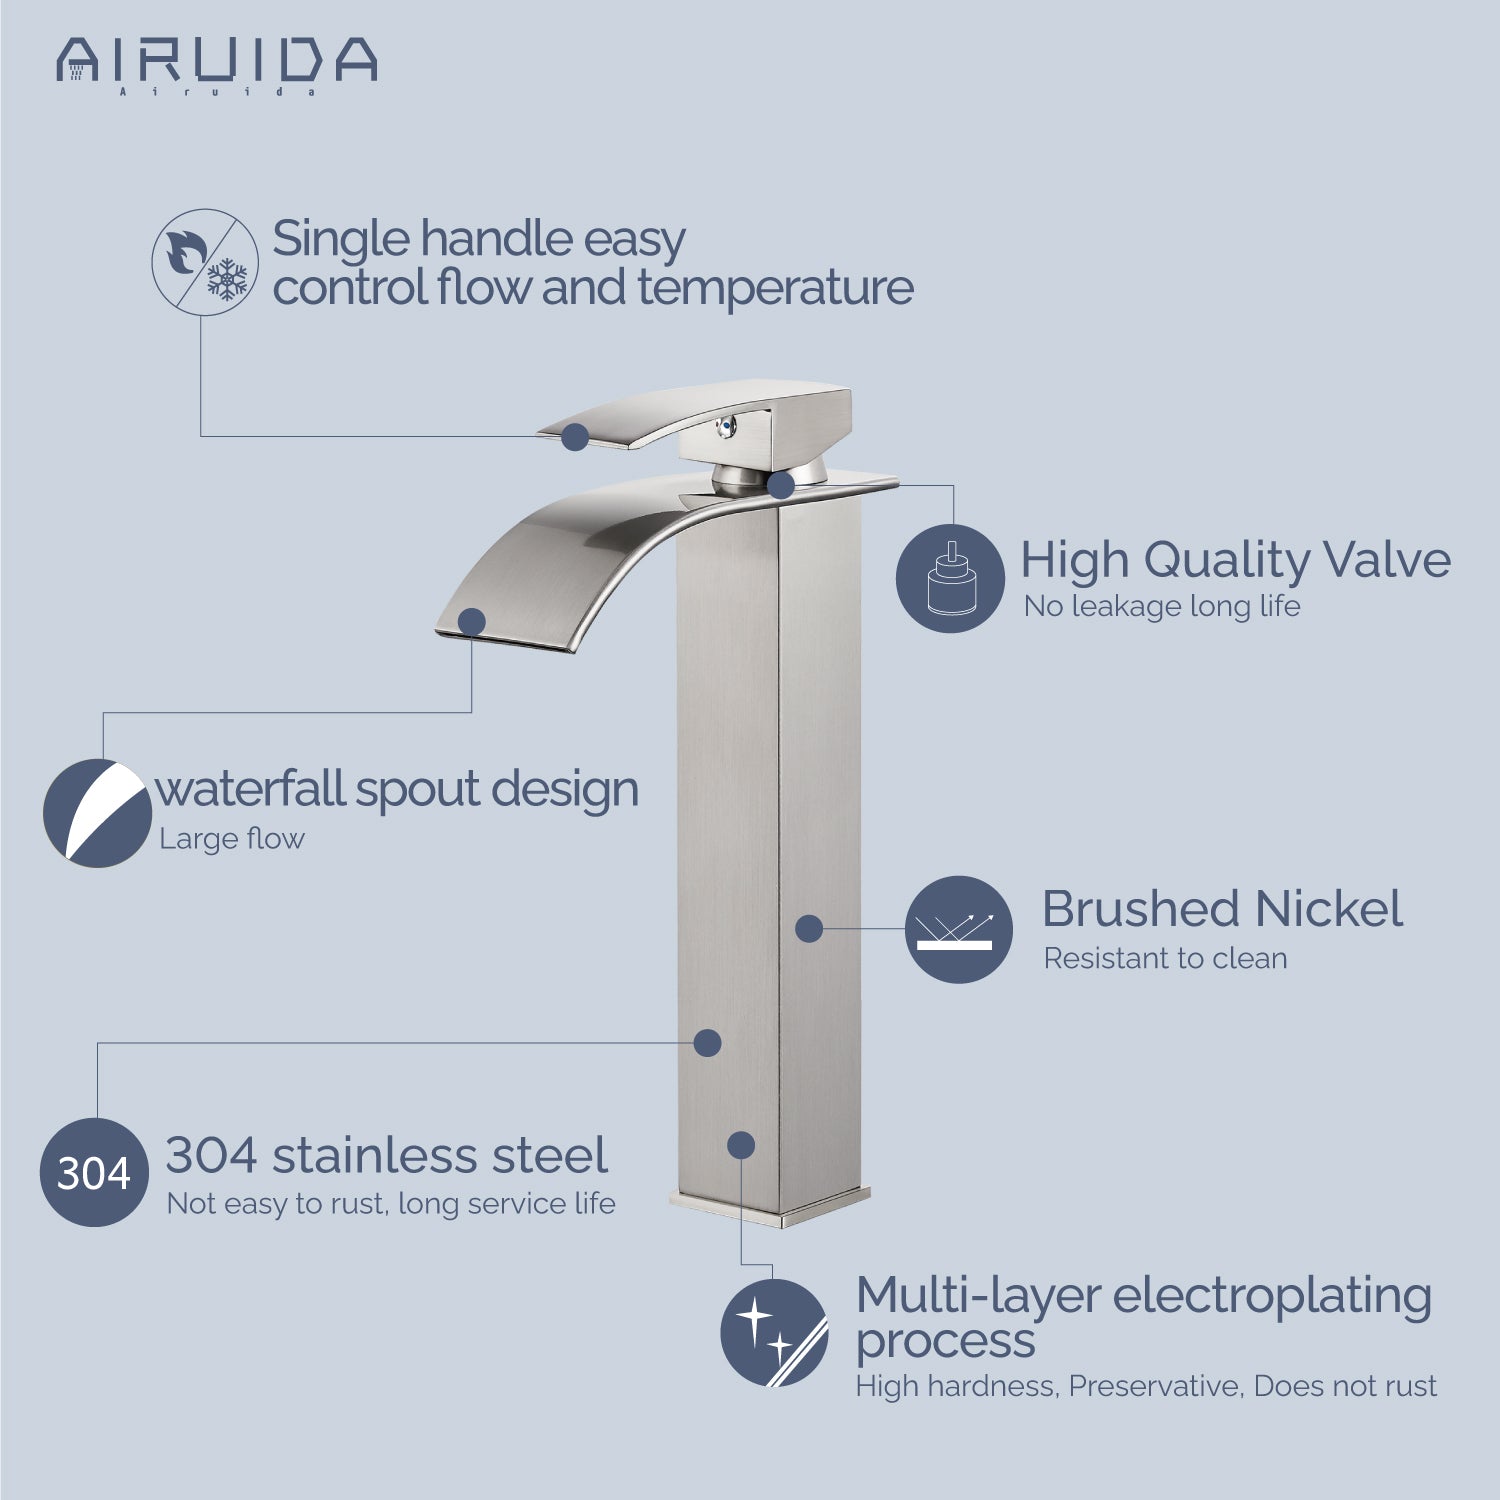 Airuida Vessel Sink Faucet, Tall Waterfall Bathroom Faucet, Single Handle One Hole Mixer Bowl Tap with Large Rectangular Spout, Bar Sink Faucet Lavatory Vanity